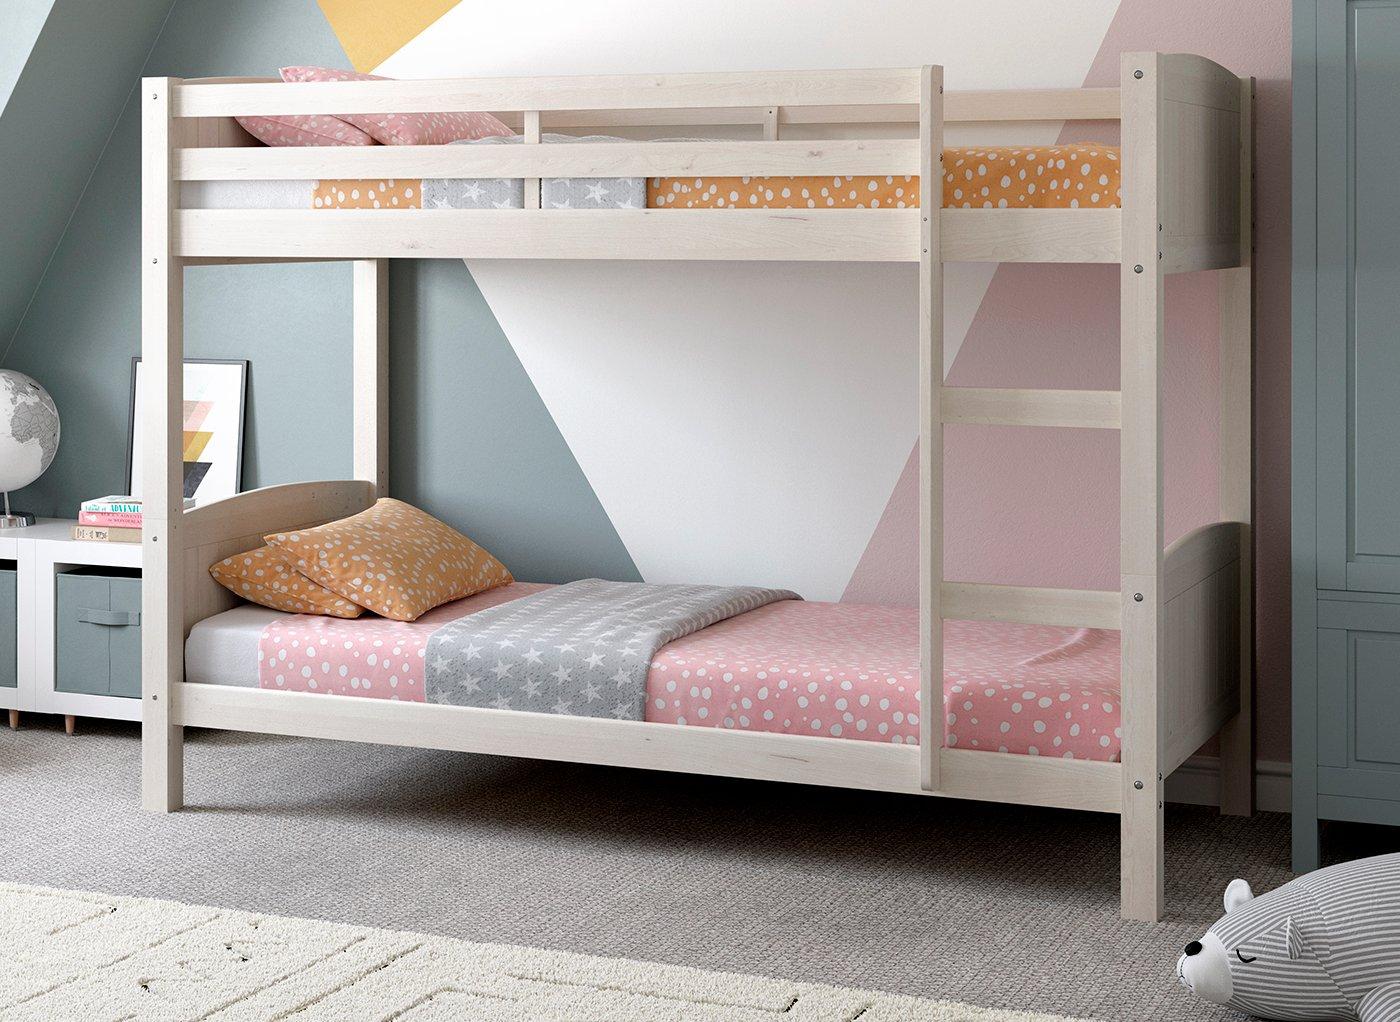 Mars Wooden Bunk Bed White Sava, Old Bunk Beds White